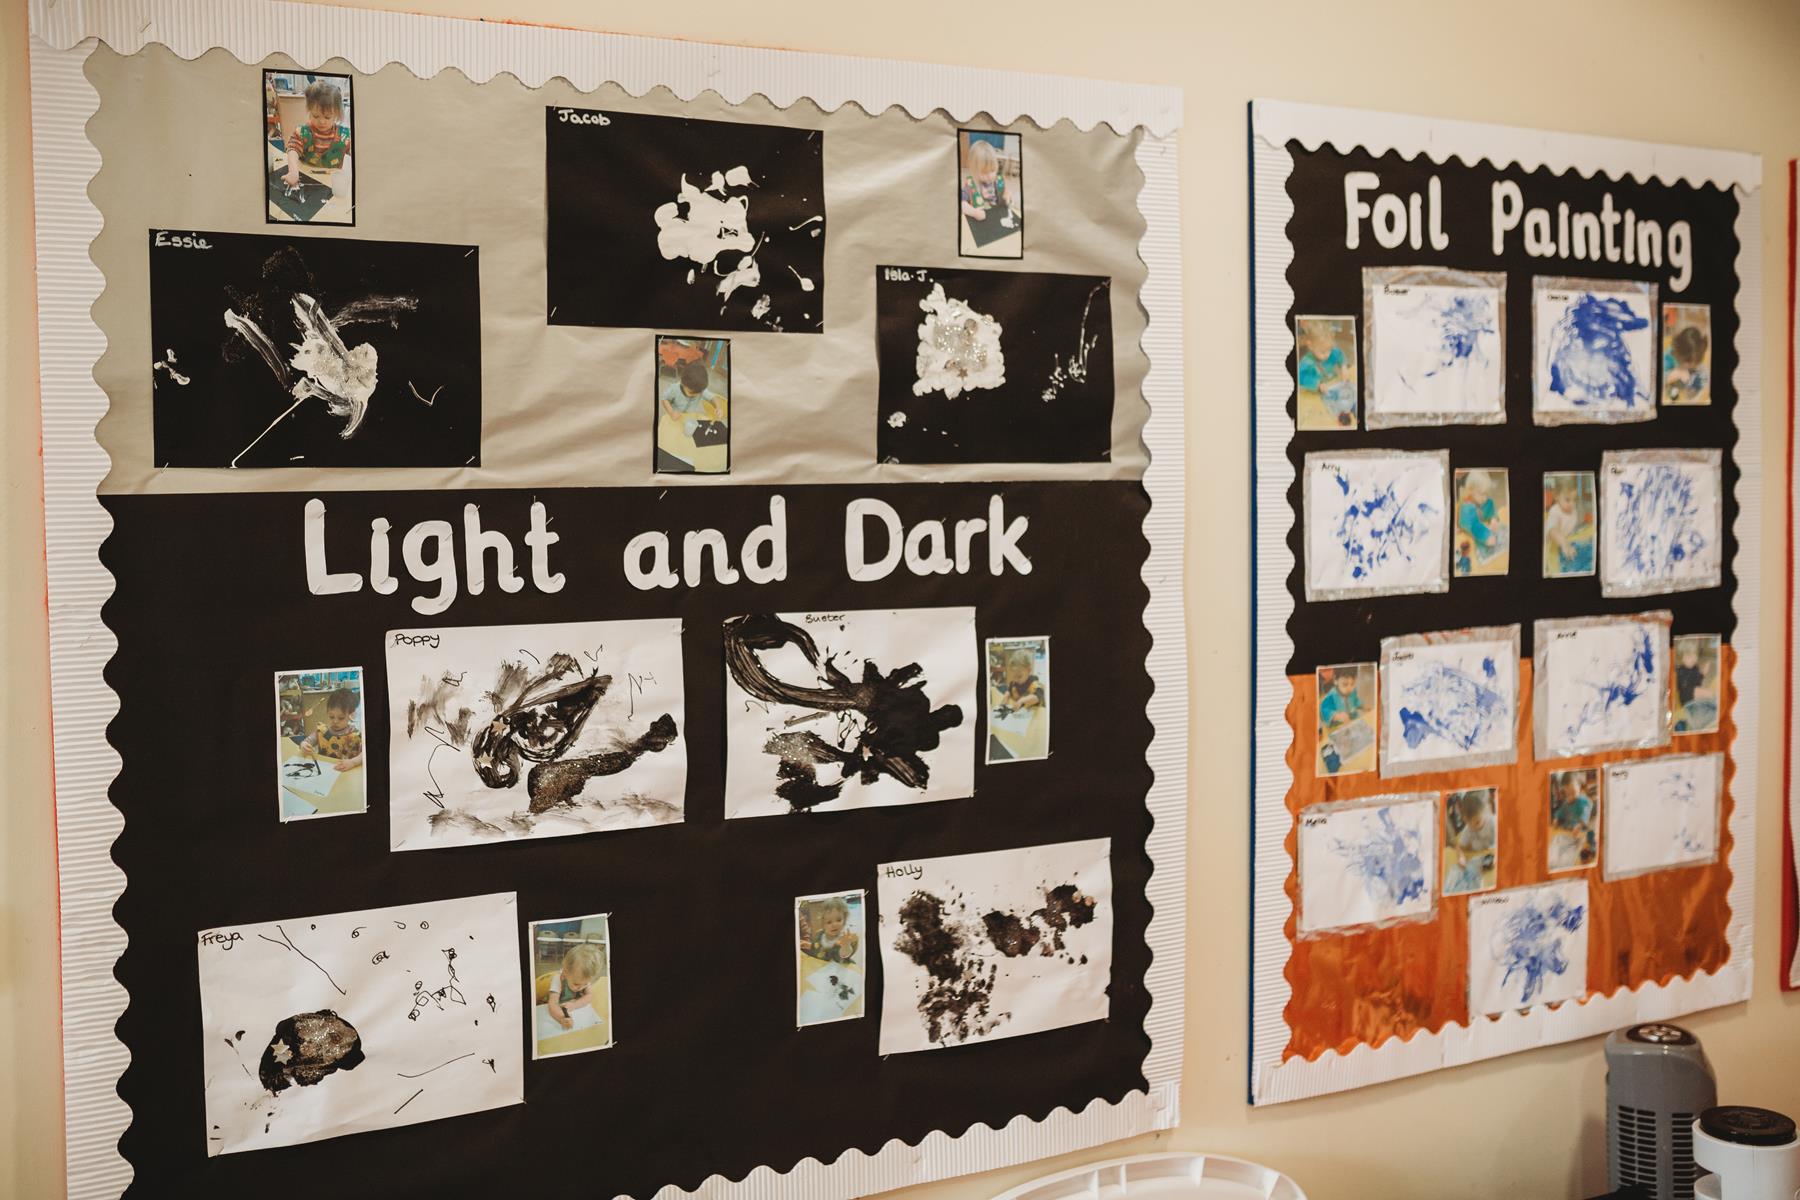 pre-school display board showing things that are light and dark